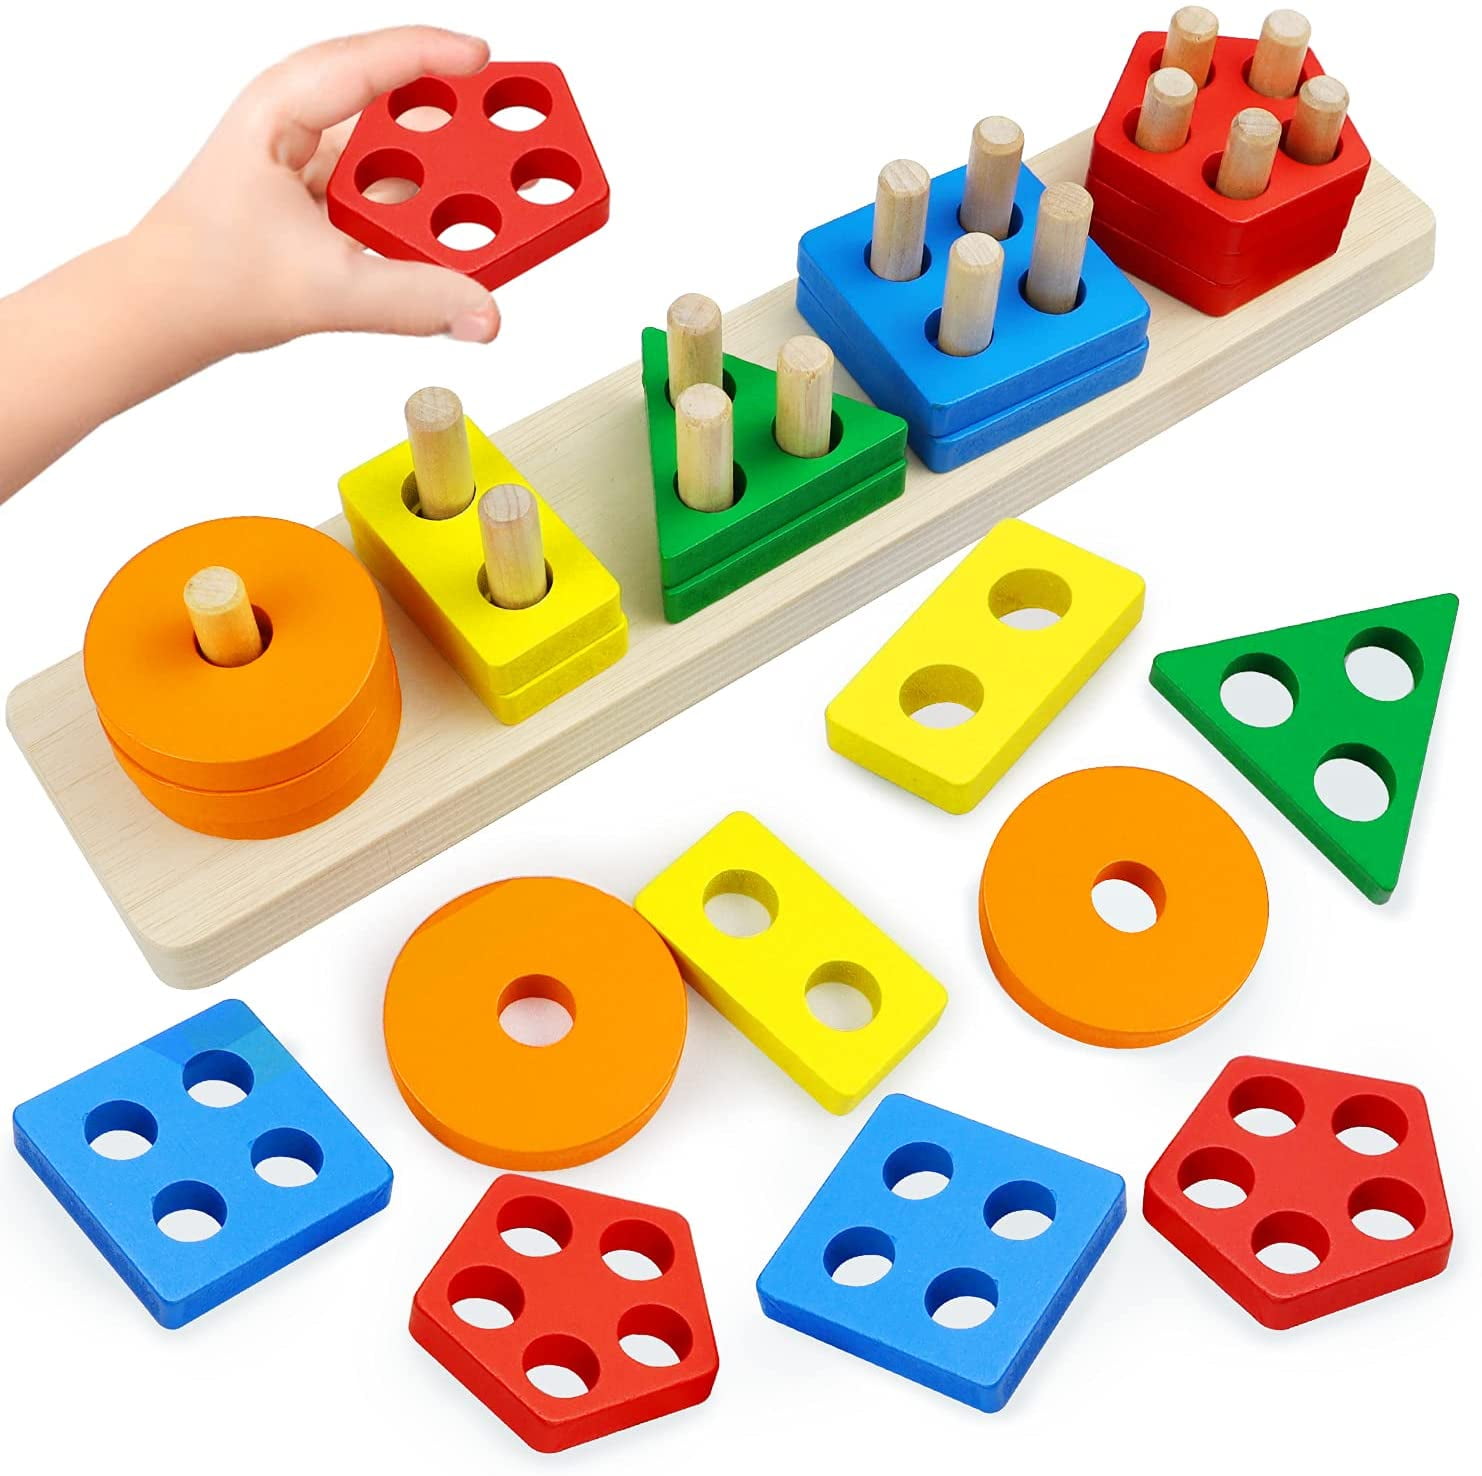 Kids Montessori Educational Geometry Stacking Building Match Wooden Toy Gift 